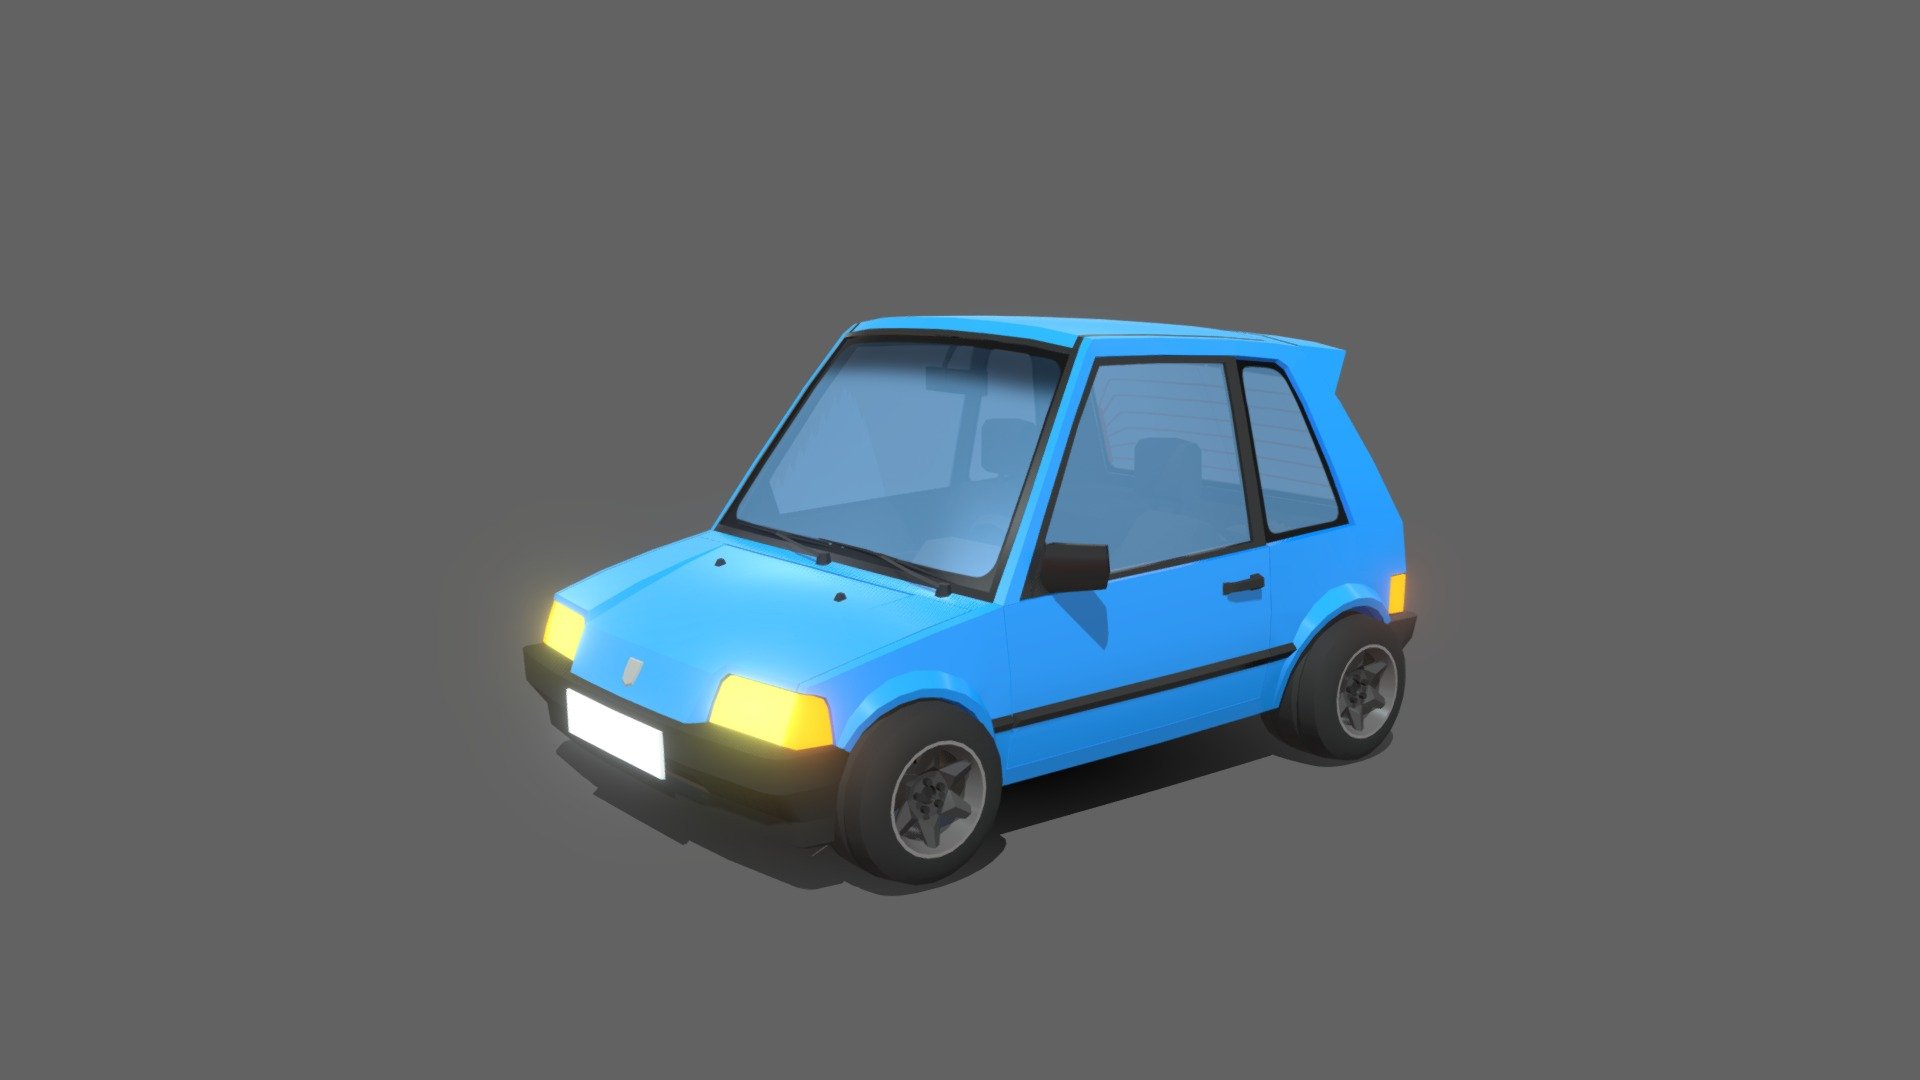 Car for your game or animation. You can disassemble it or blow it up in peaces. Have fun with it!
This model is part of still growing collection:
https://skfb.ly/ozpn9 - Low-poly cartoon style car 03 - Buy Royalty Free 3D model by arturs.vitas 3d model